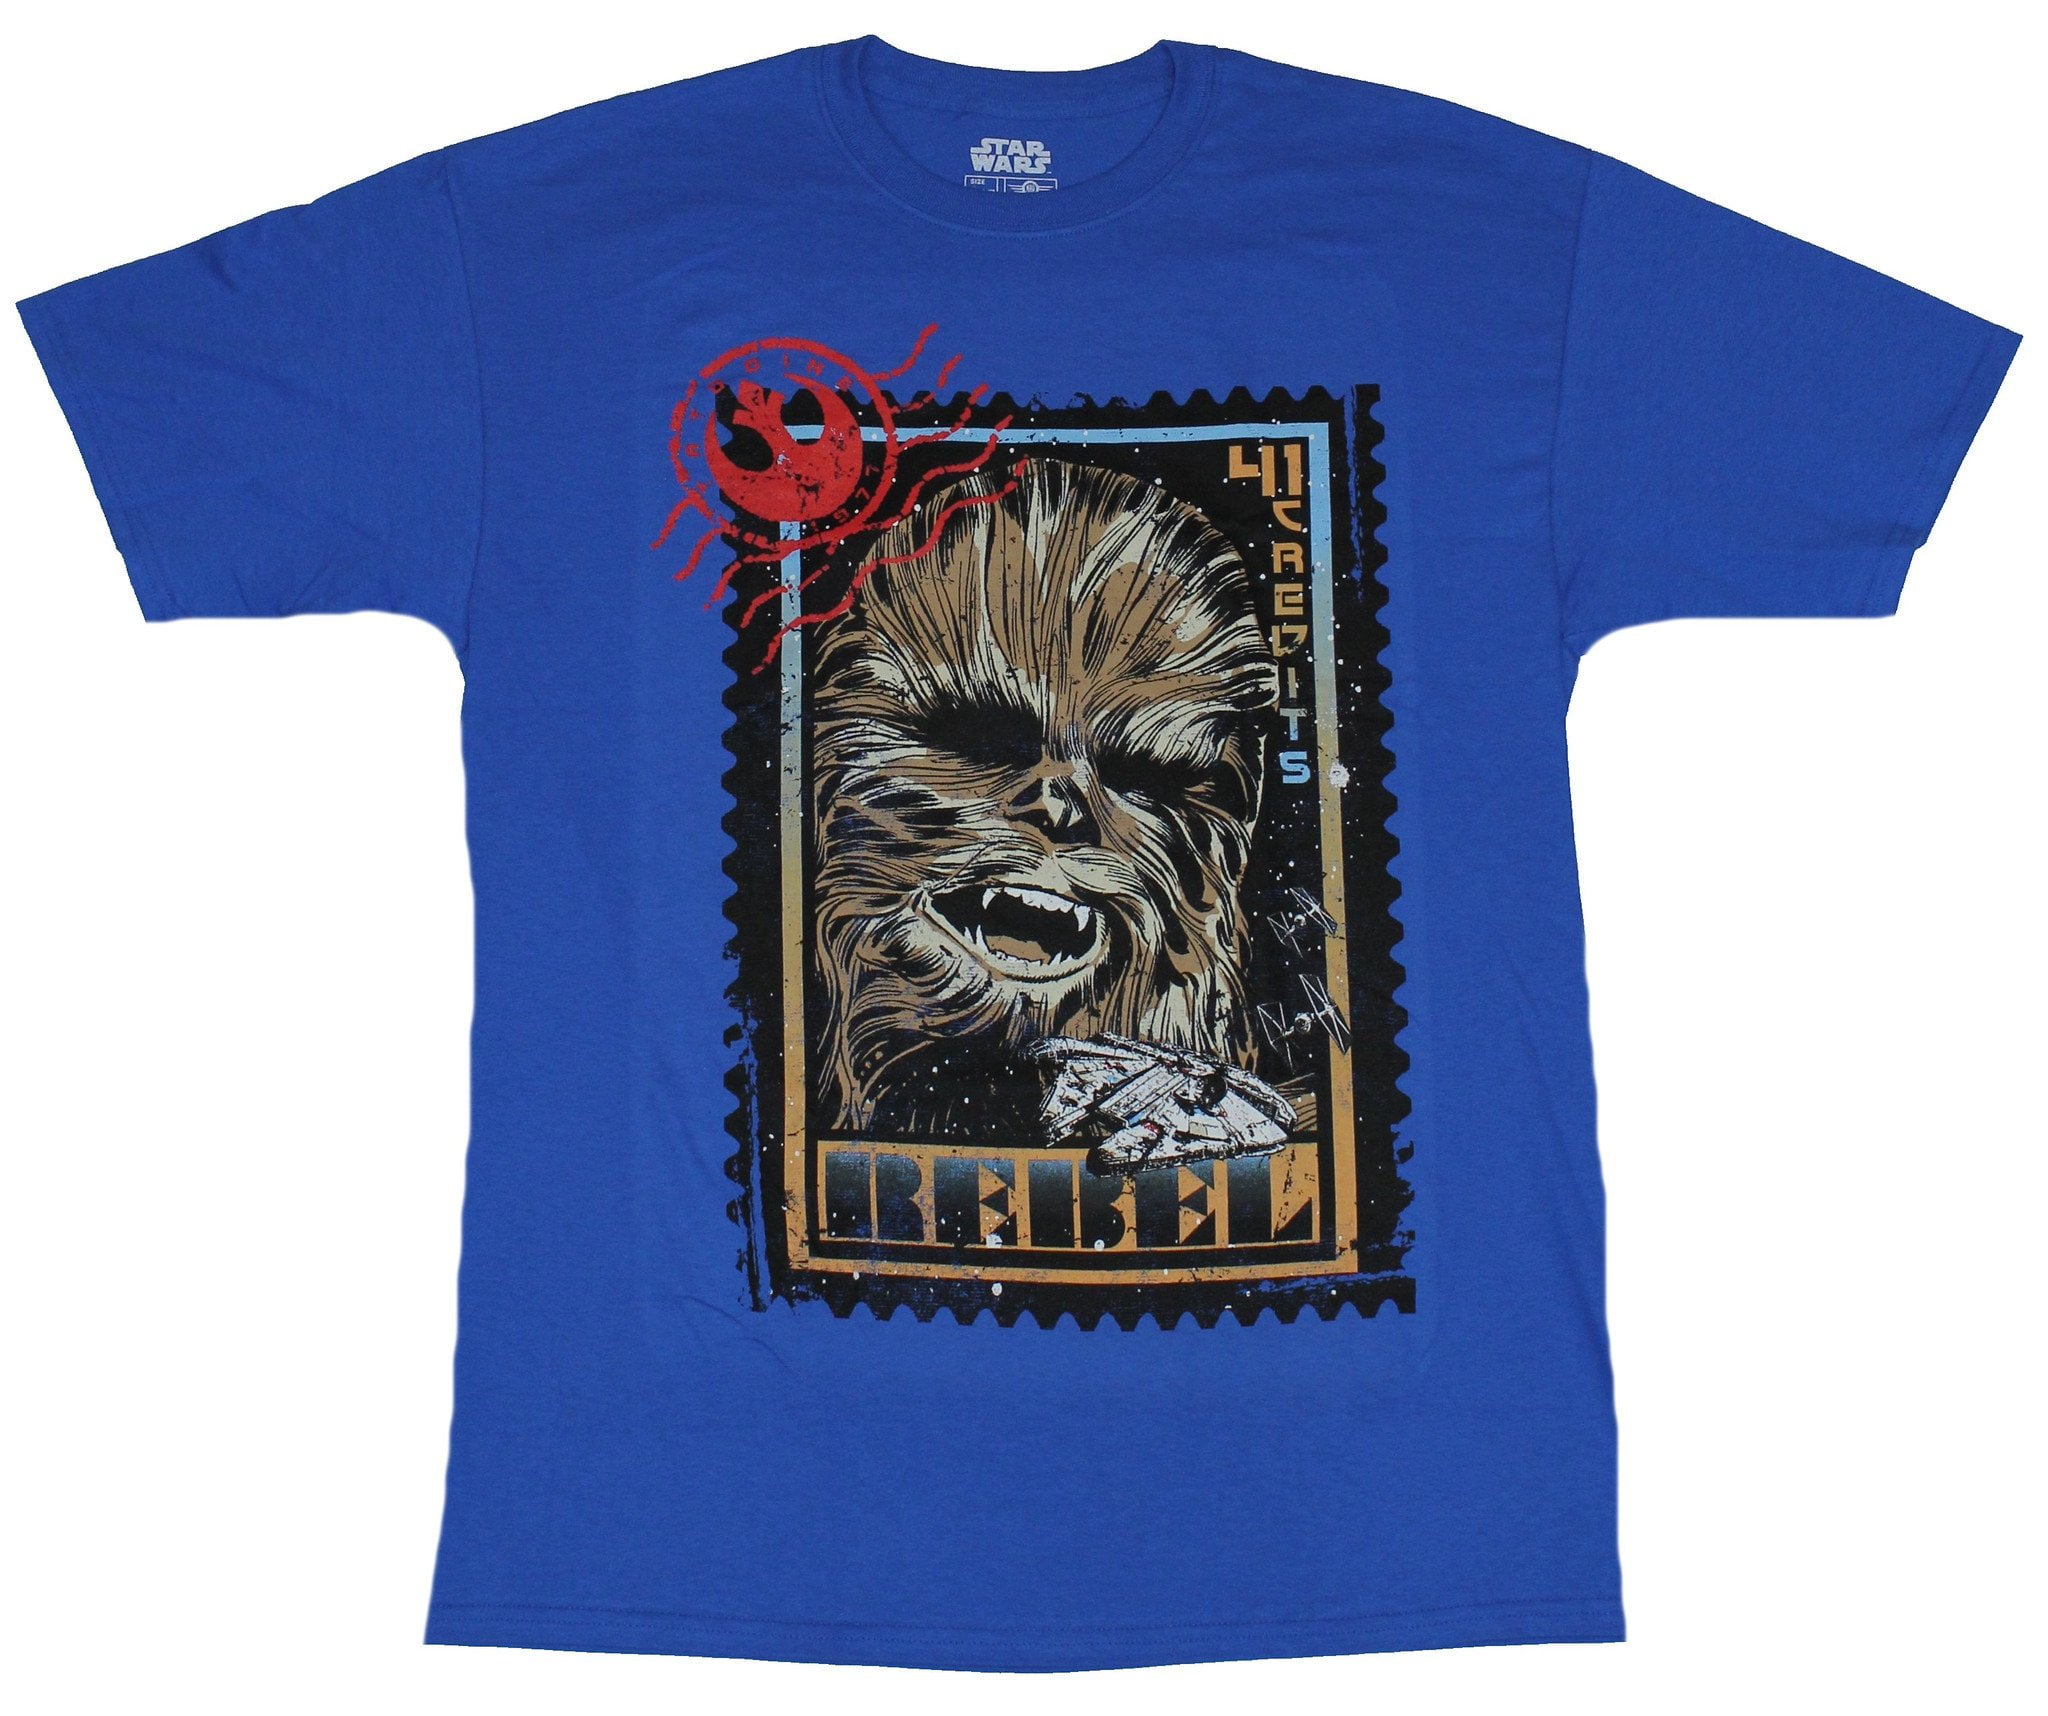 In My Parents Basement - Star Wars Mens Tall T-Shirt - Chewbacca 41 Credit Rebel Stamp Image